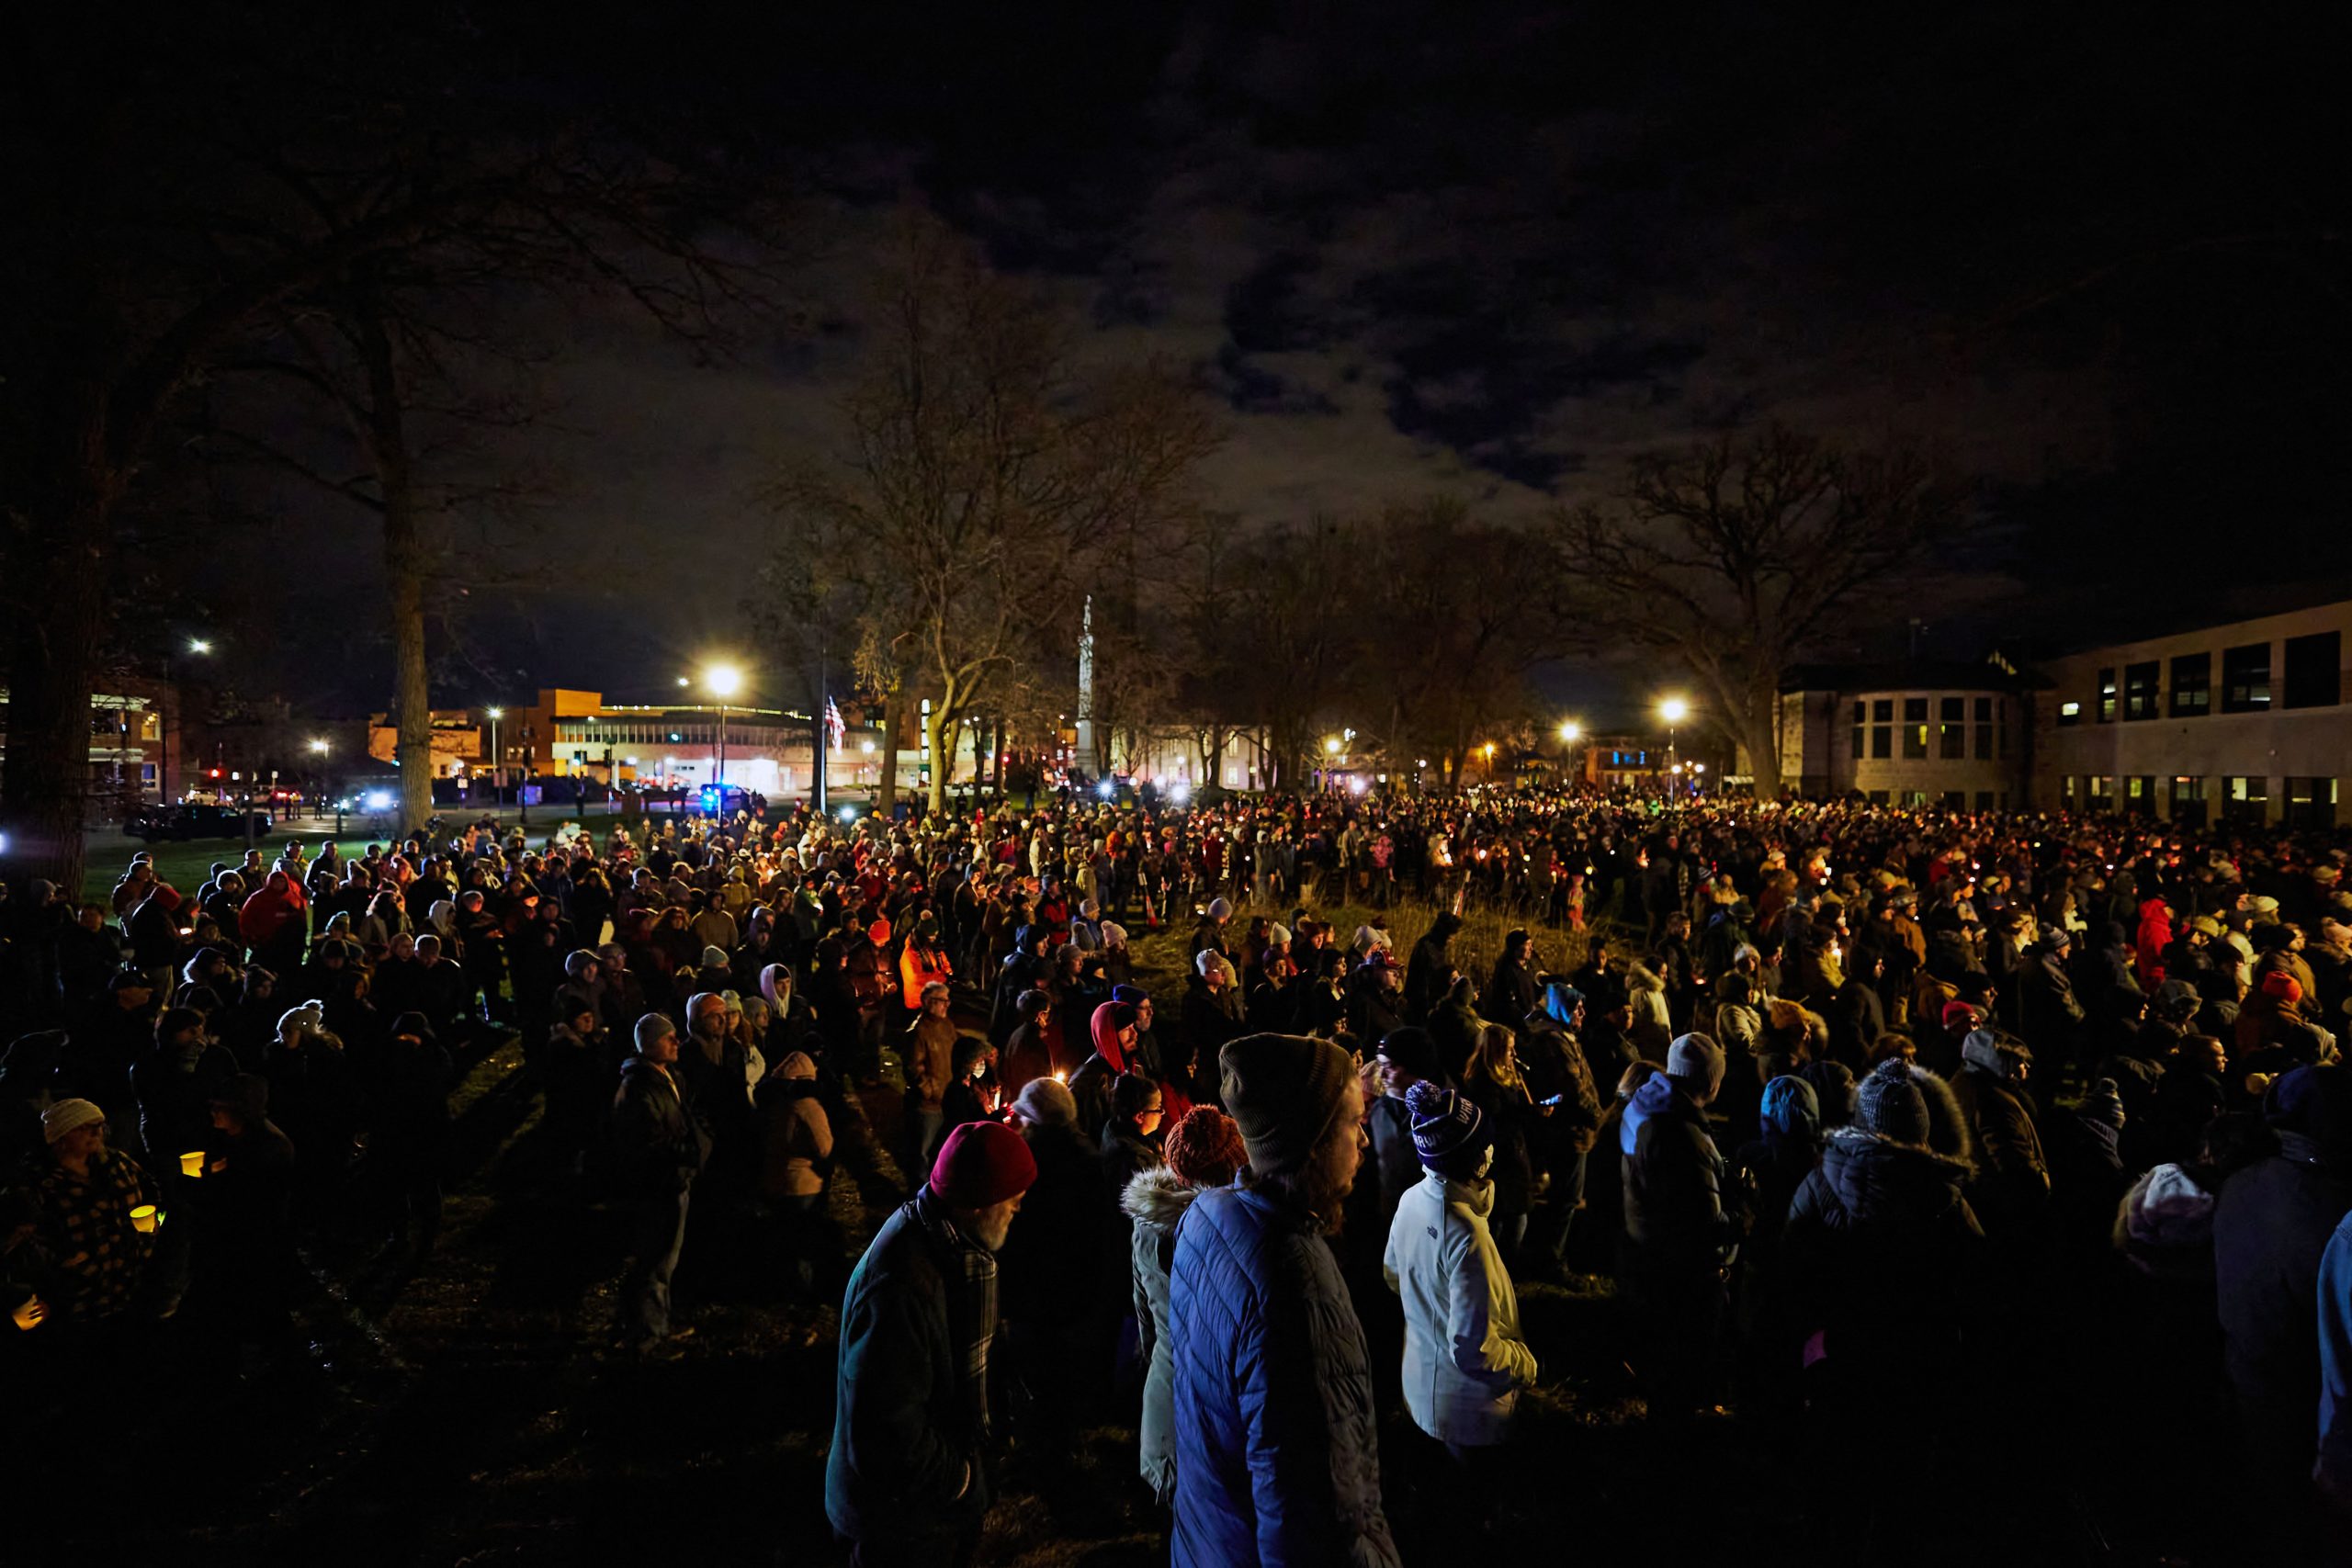 TOPSHOT - People attend a candle light vigil in Cutler Park in Waukesha, Wisconsin on November 22, 2021, the day after a vehicle drove through a Christmas parade killing five people. - US authorities identified the driver suspected of plowing into a Christmas parade in the Midwestern city of Waukesha, killing at least five and wounding dozens, as media reported he was fleeing a knife fight. The Sunday evening chaos in Wisconsin, which saw a red SUV speed into a crowd of men, women and children raised immediate fears of a deliberate act -- in a state where tensions have spiked following a high-profile acquittal in a racially-charged trial. (Photo by Mustafa Hussain / AFP) (Photo by MUSTAFA HUSSAIN/AFP via Getty Images)